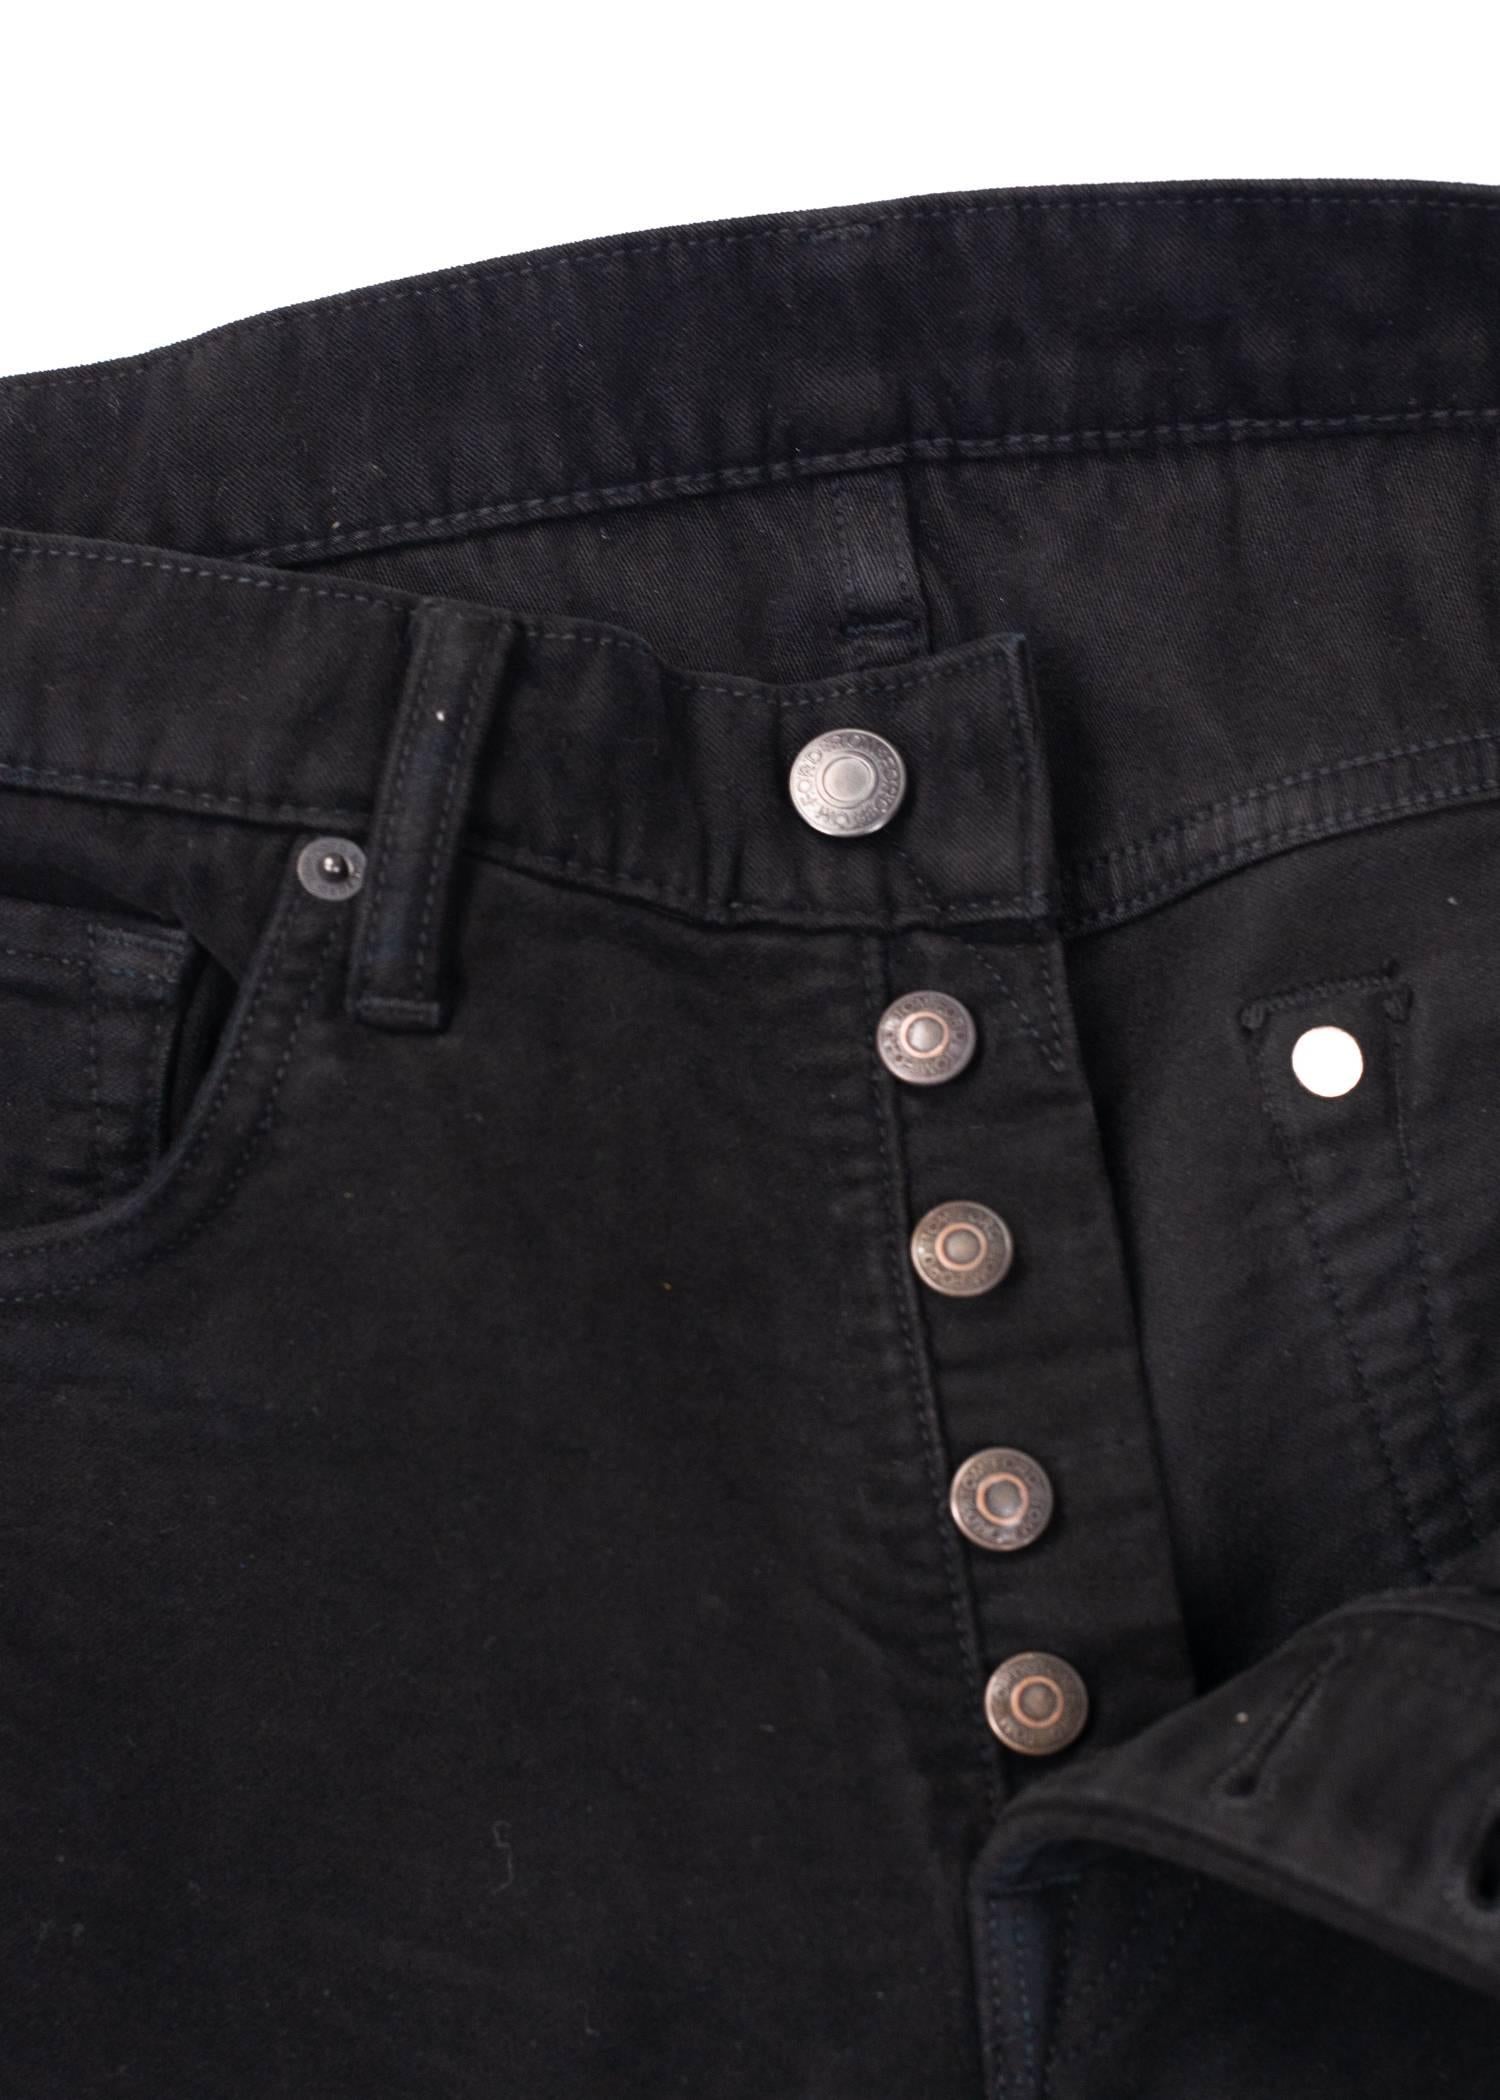 Smooth things out in your Tom Ford Velvet Jeans. These high pile pure cotton jeans feature dark gunmetal hardware, slim fit silhouette, and a five button fly. Pair these pants with an earth tone top for a sensual sophistication.

 ​​​​New with